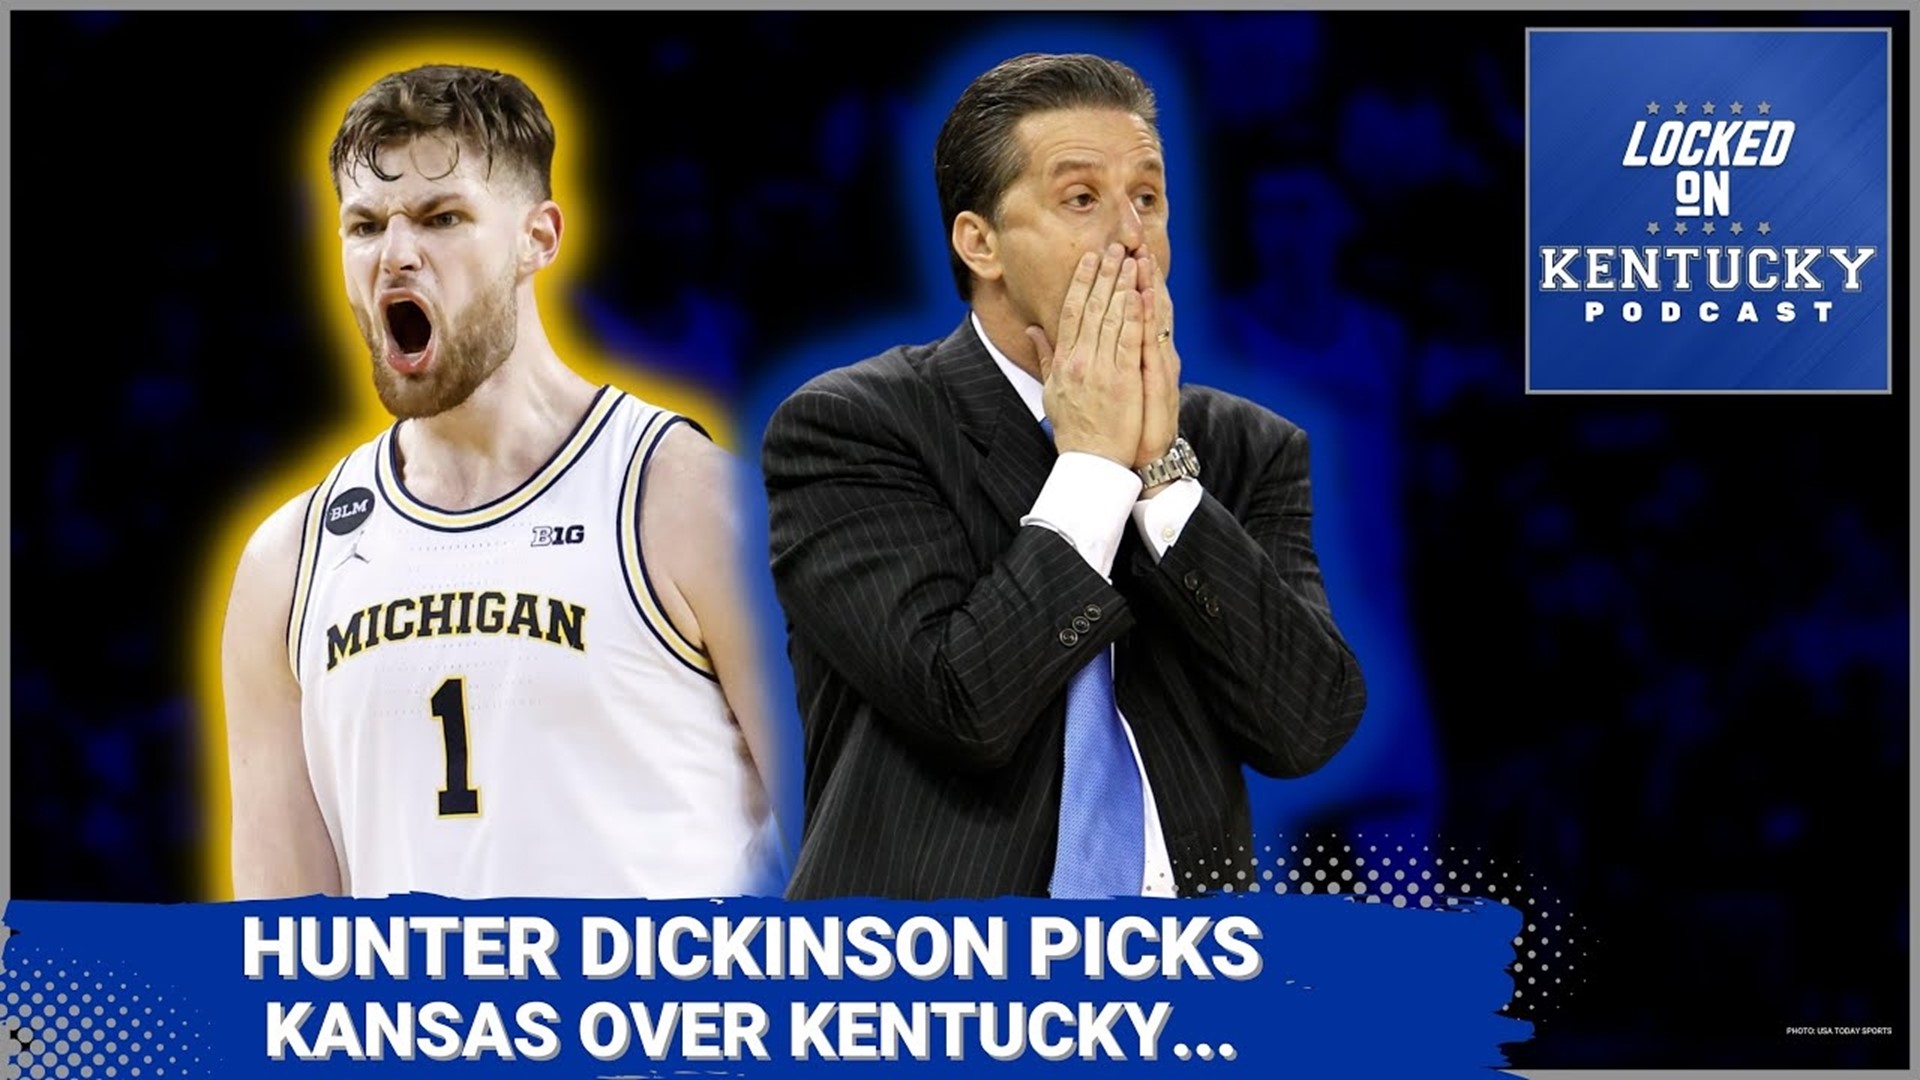 Michigan transfer Hunter Dickinson has committed to the Kansas Jayhawks over Kentucky basketball, among others.